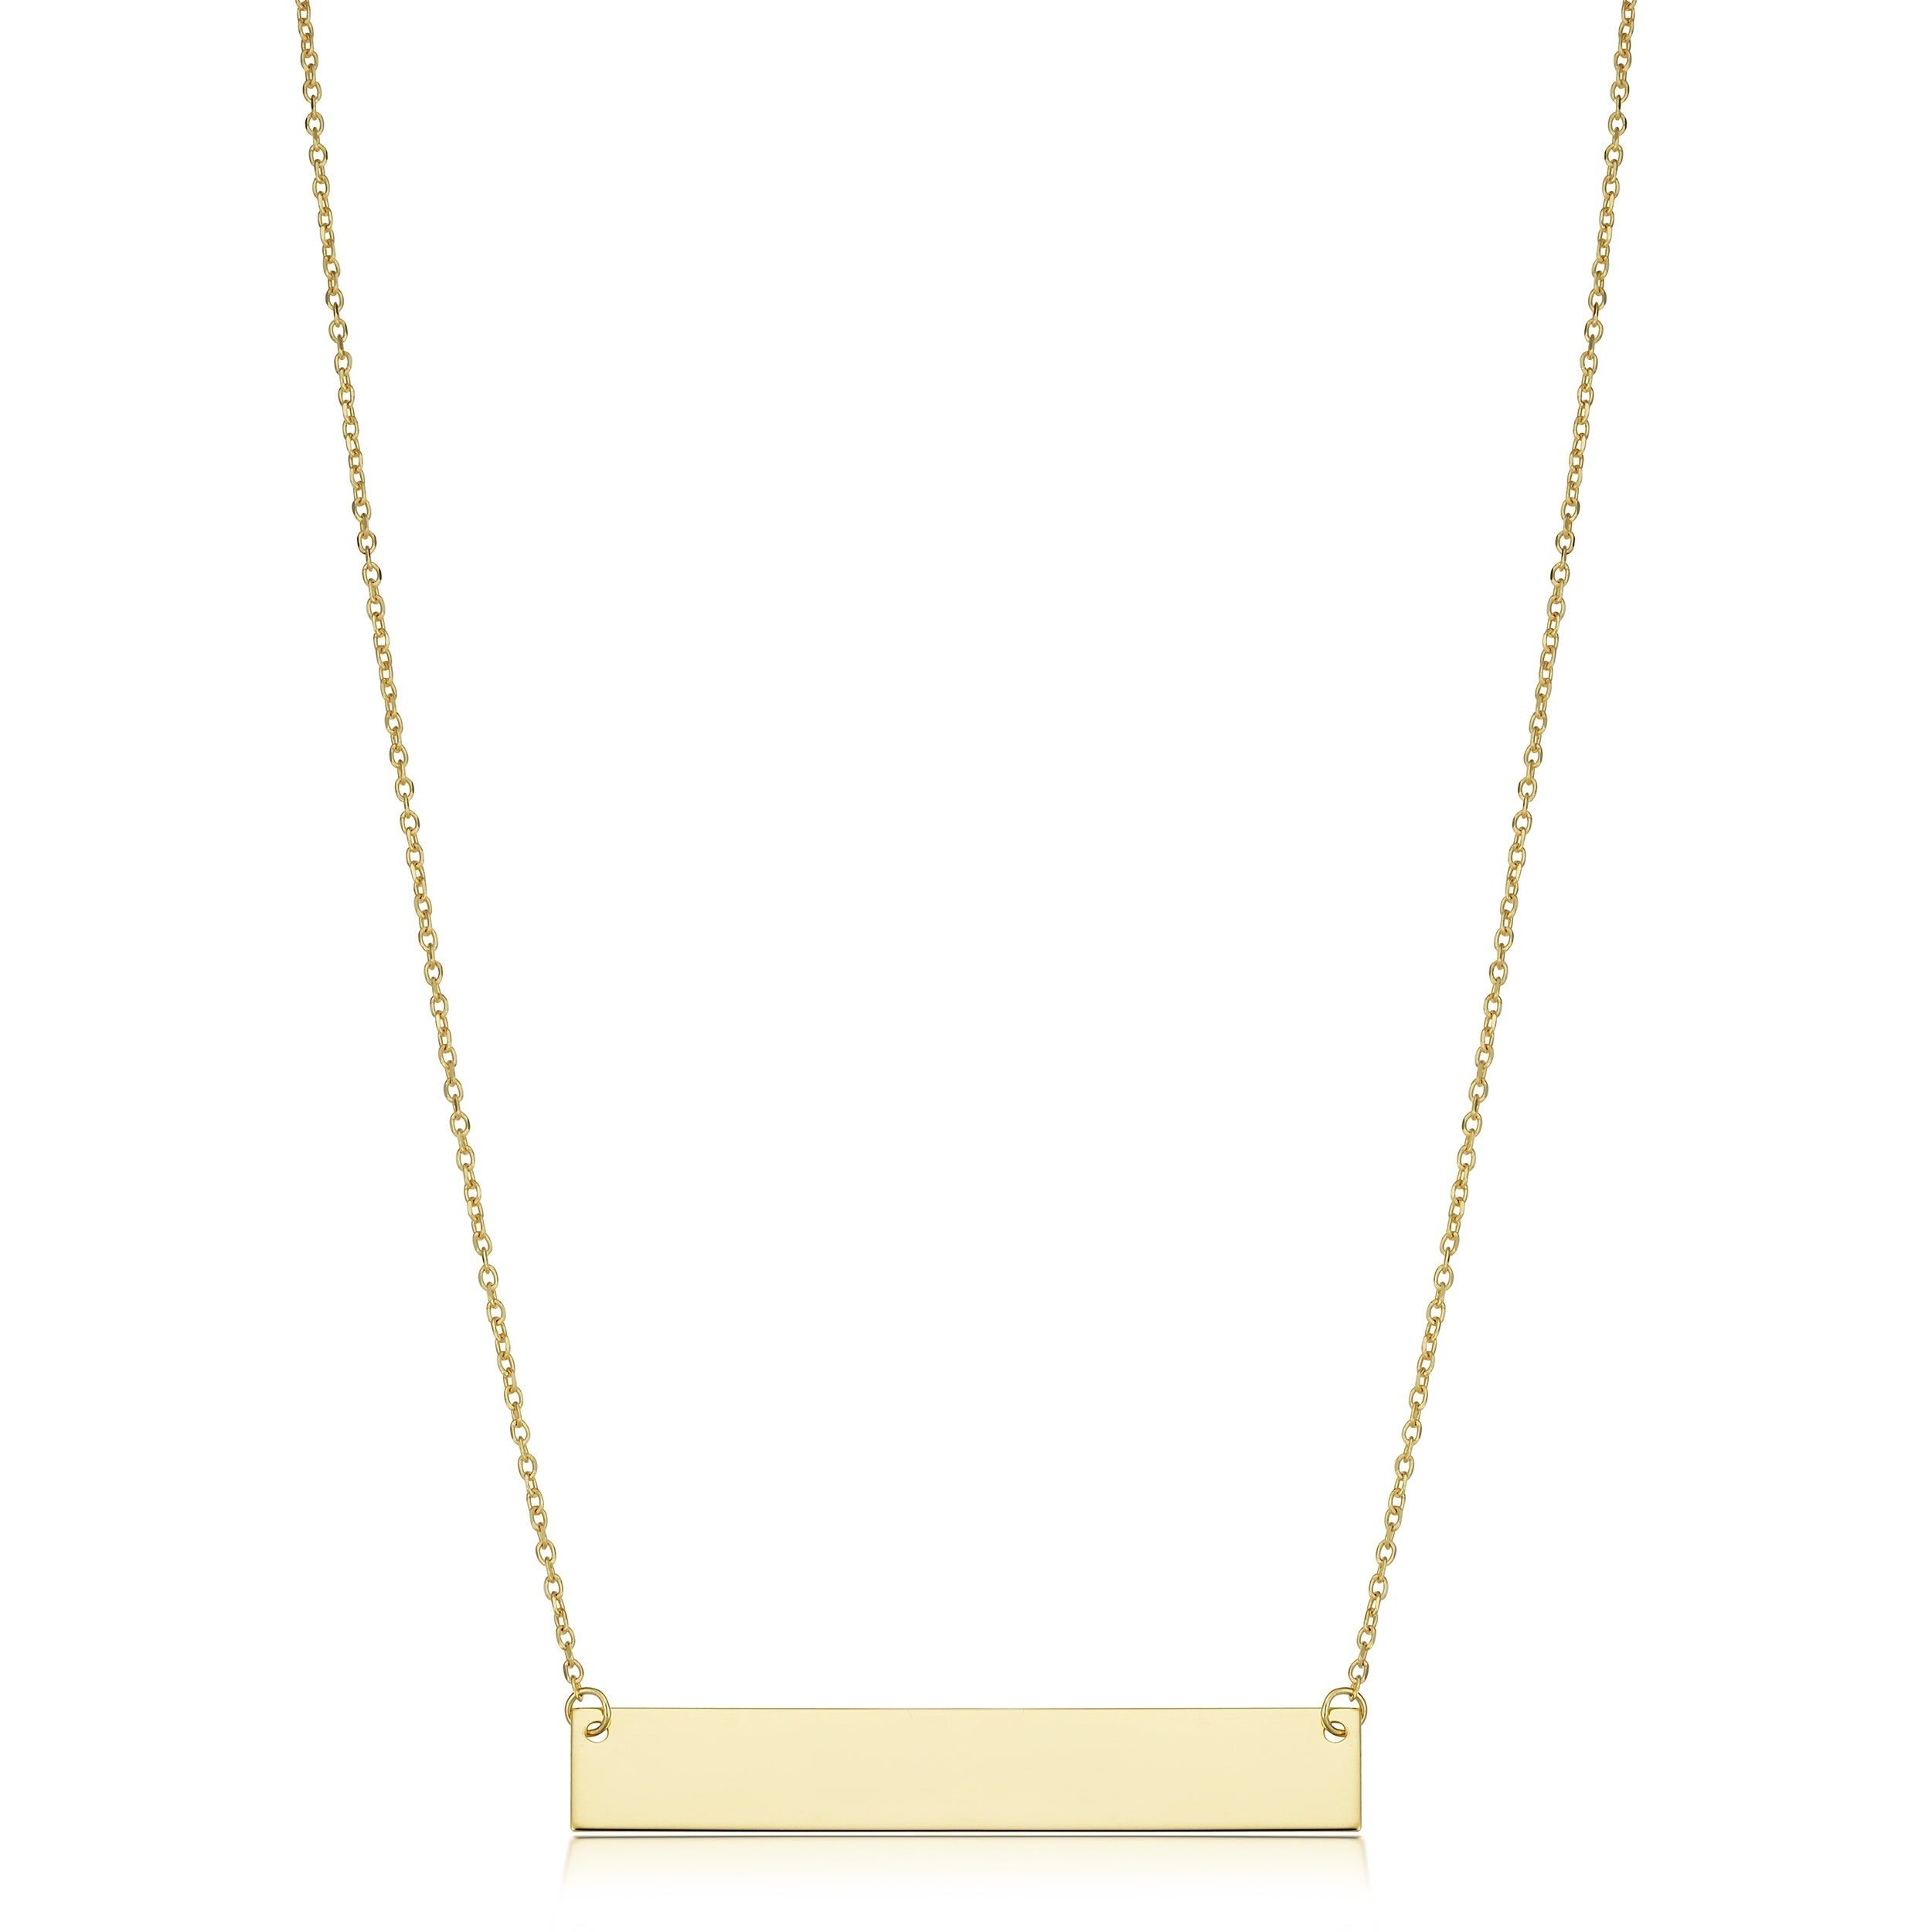 10k Or 14k Gold Engraveable Bar Cable Chain Necklace (18 Inch) Throughout Most Recent Classic Cable Chain Necklaces (View 3 of 25)